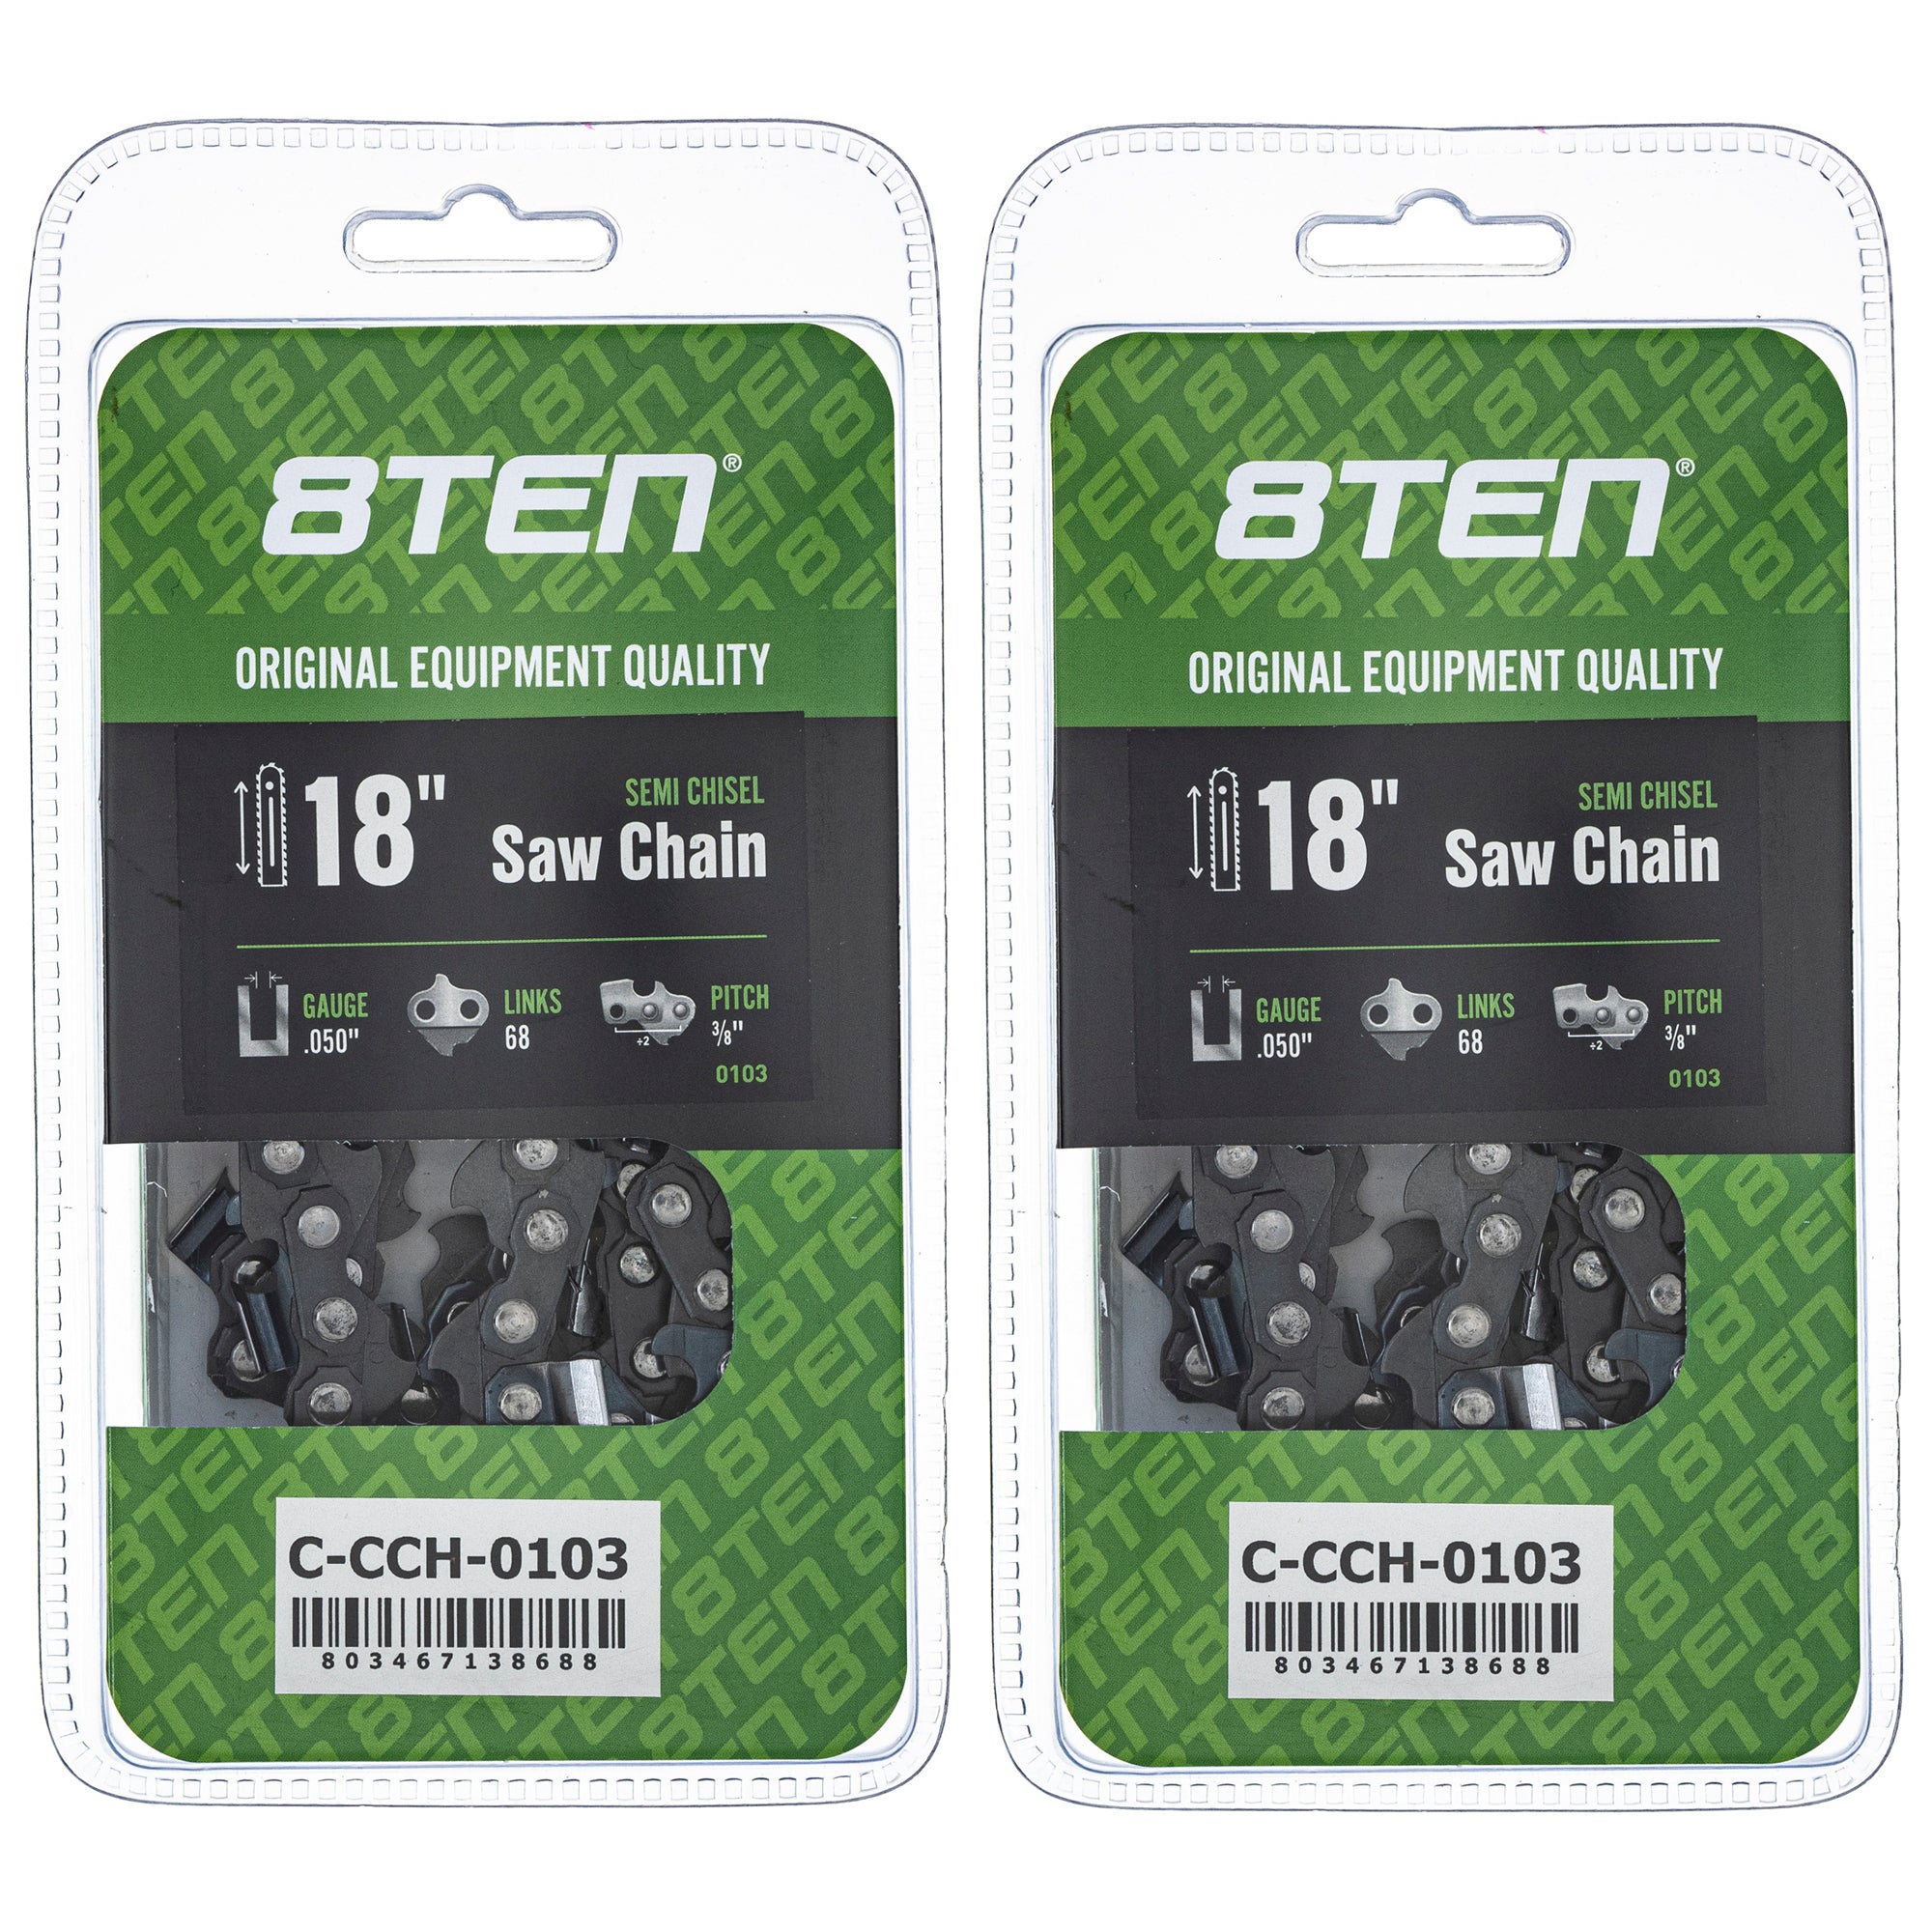 Chainsaw Chain 18 Inch .050 3/8 68DL 2-Pack for zOTHER Stens Ref No Oregon Husqvarna 8TEN 810-CCC2325H